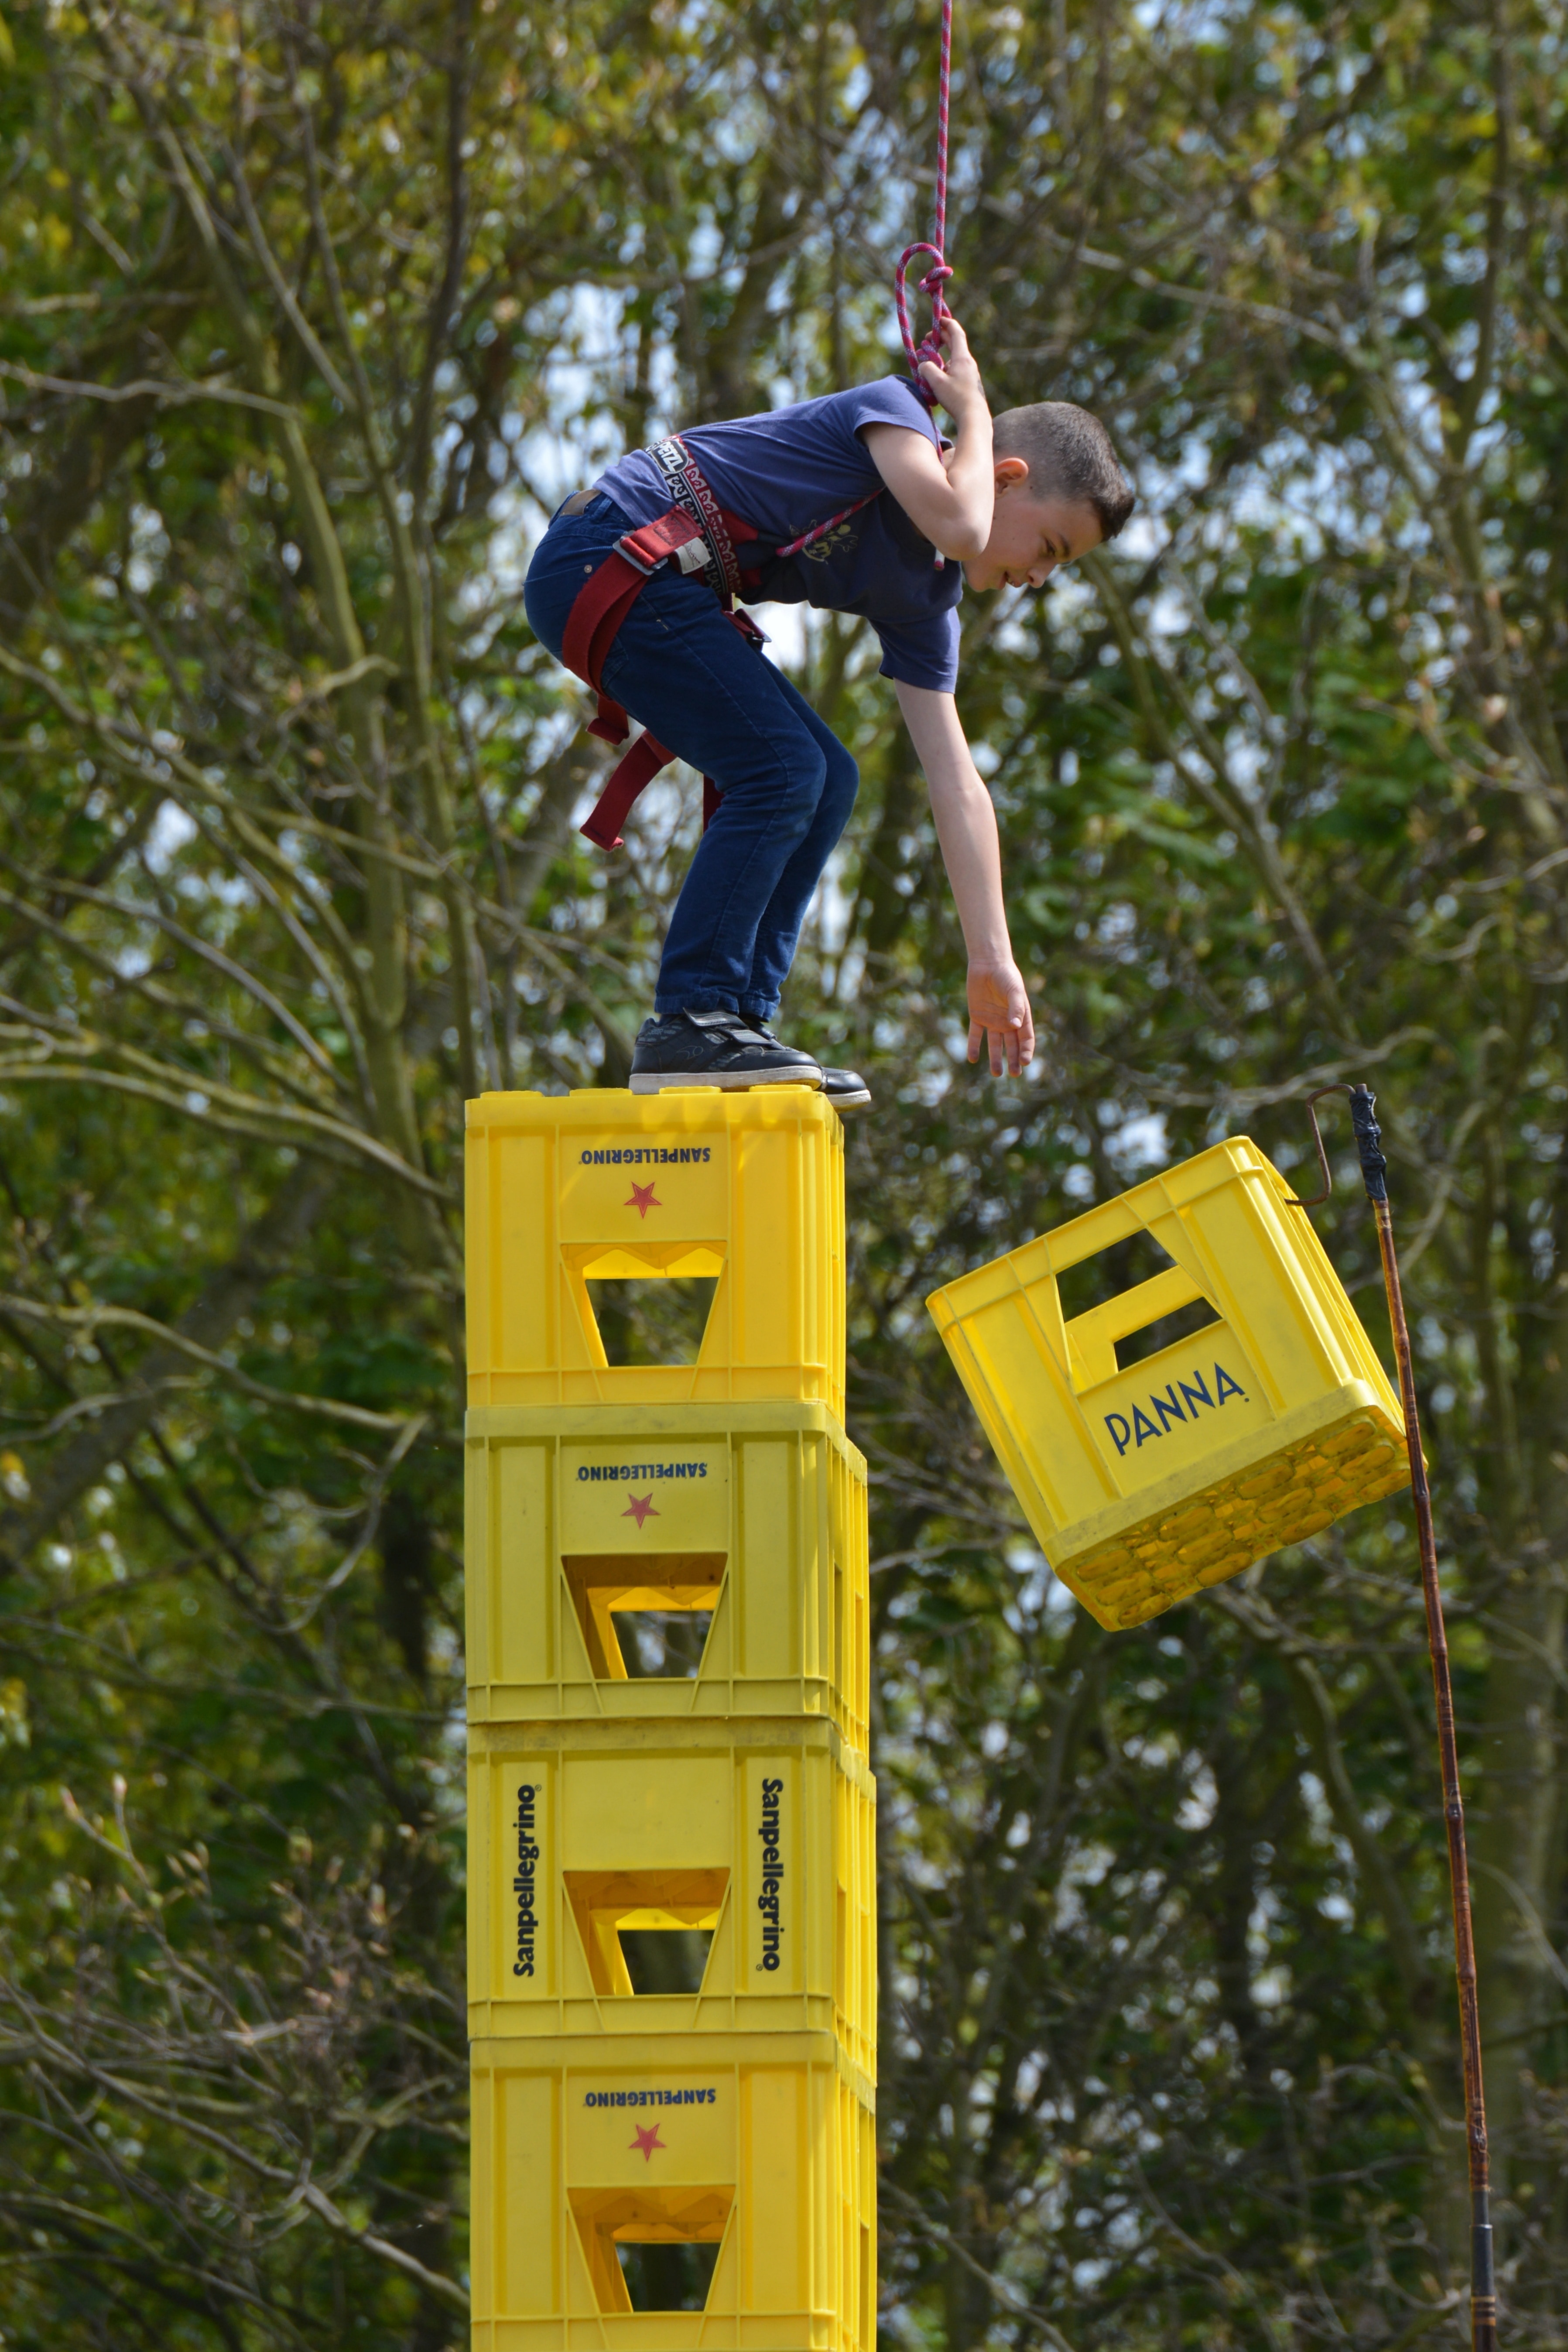 boy wearing blue shirt on top of yellow plastic crates